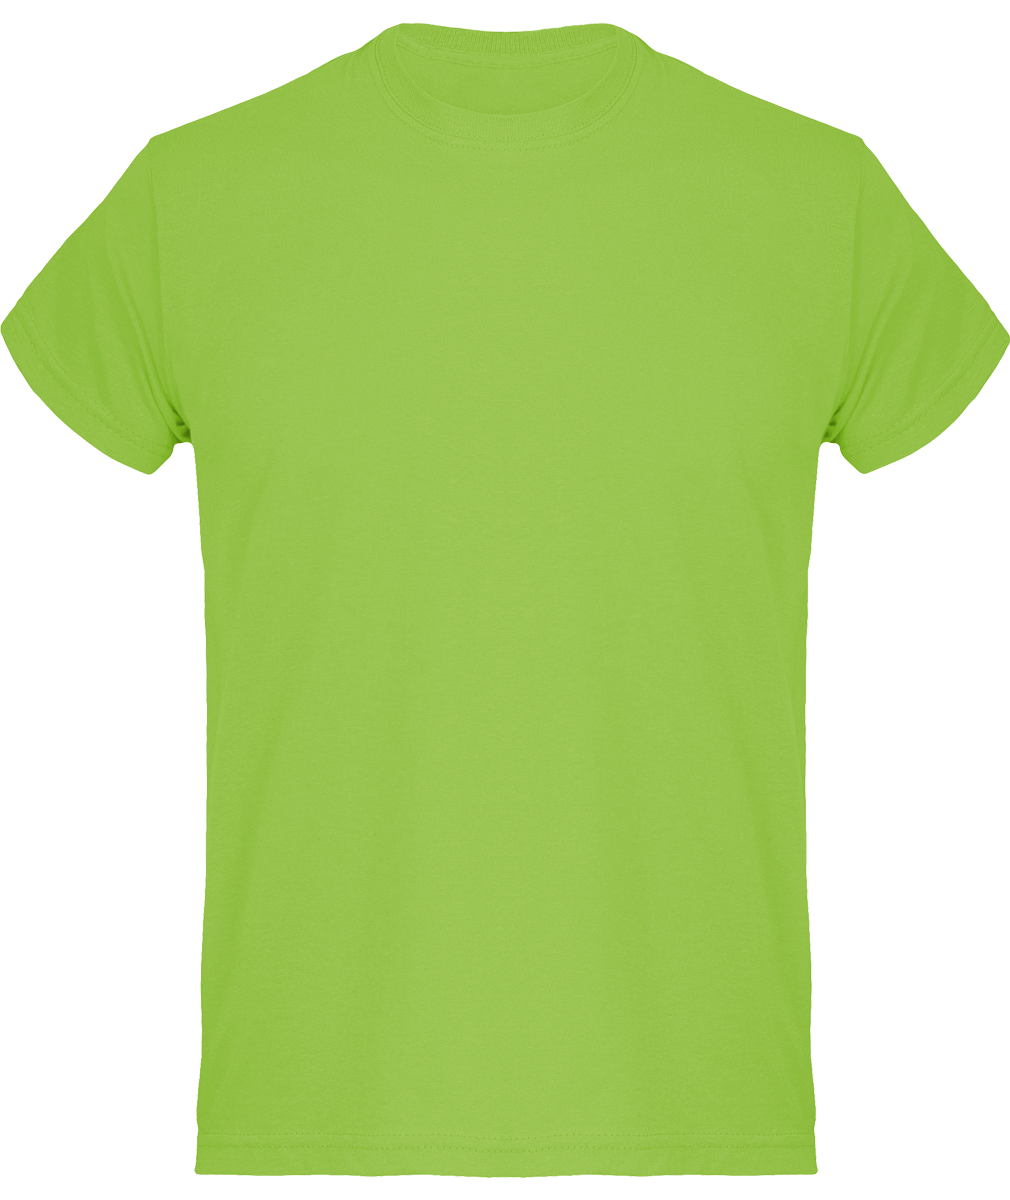 Basic Cotton T-Shirt For Men Ideal For Customization Lime